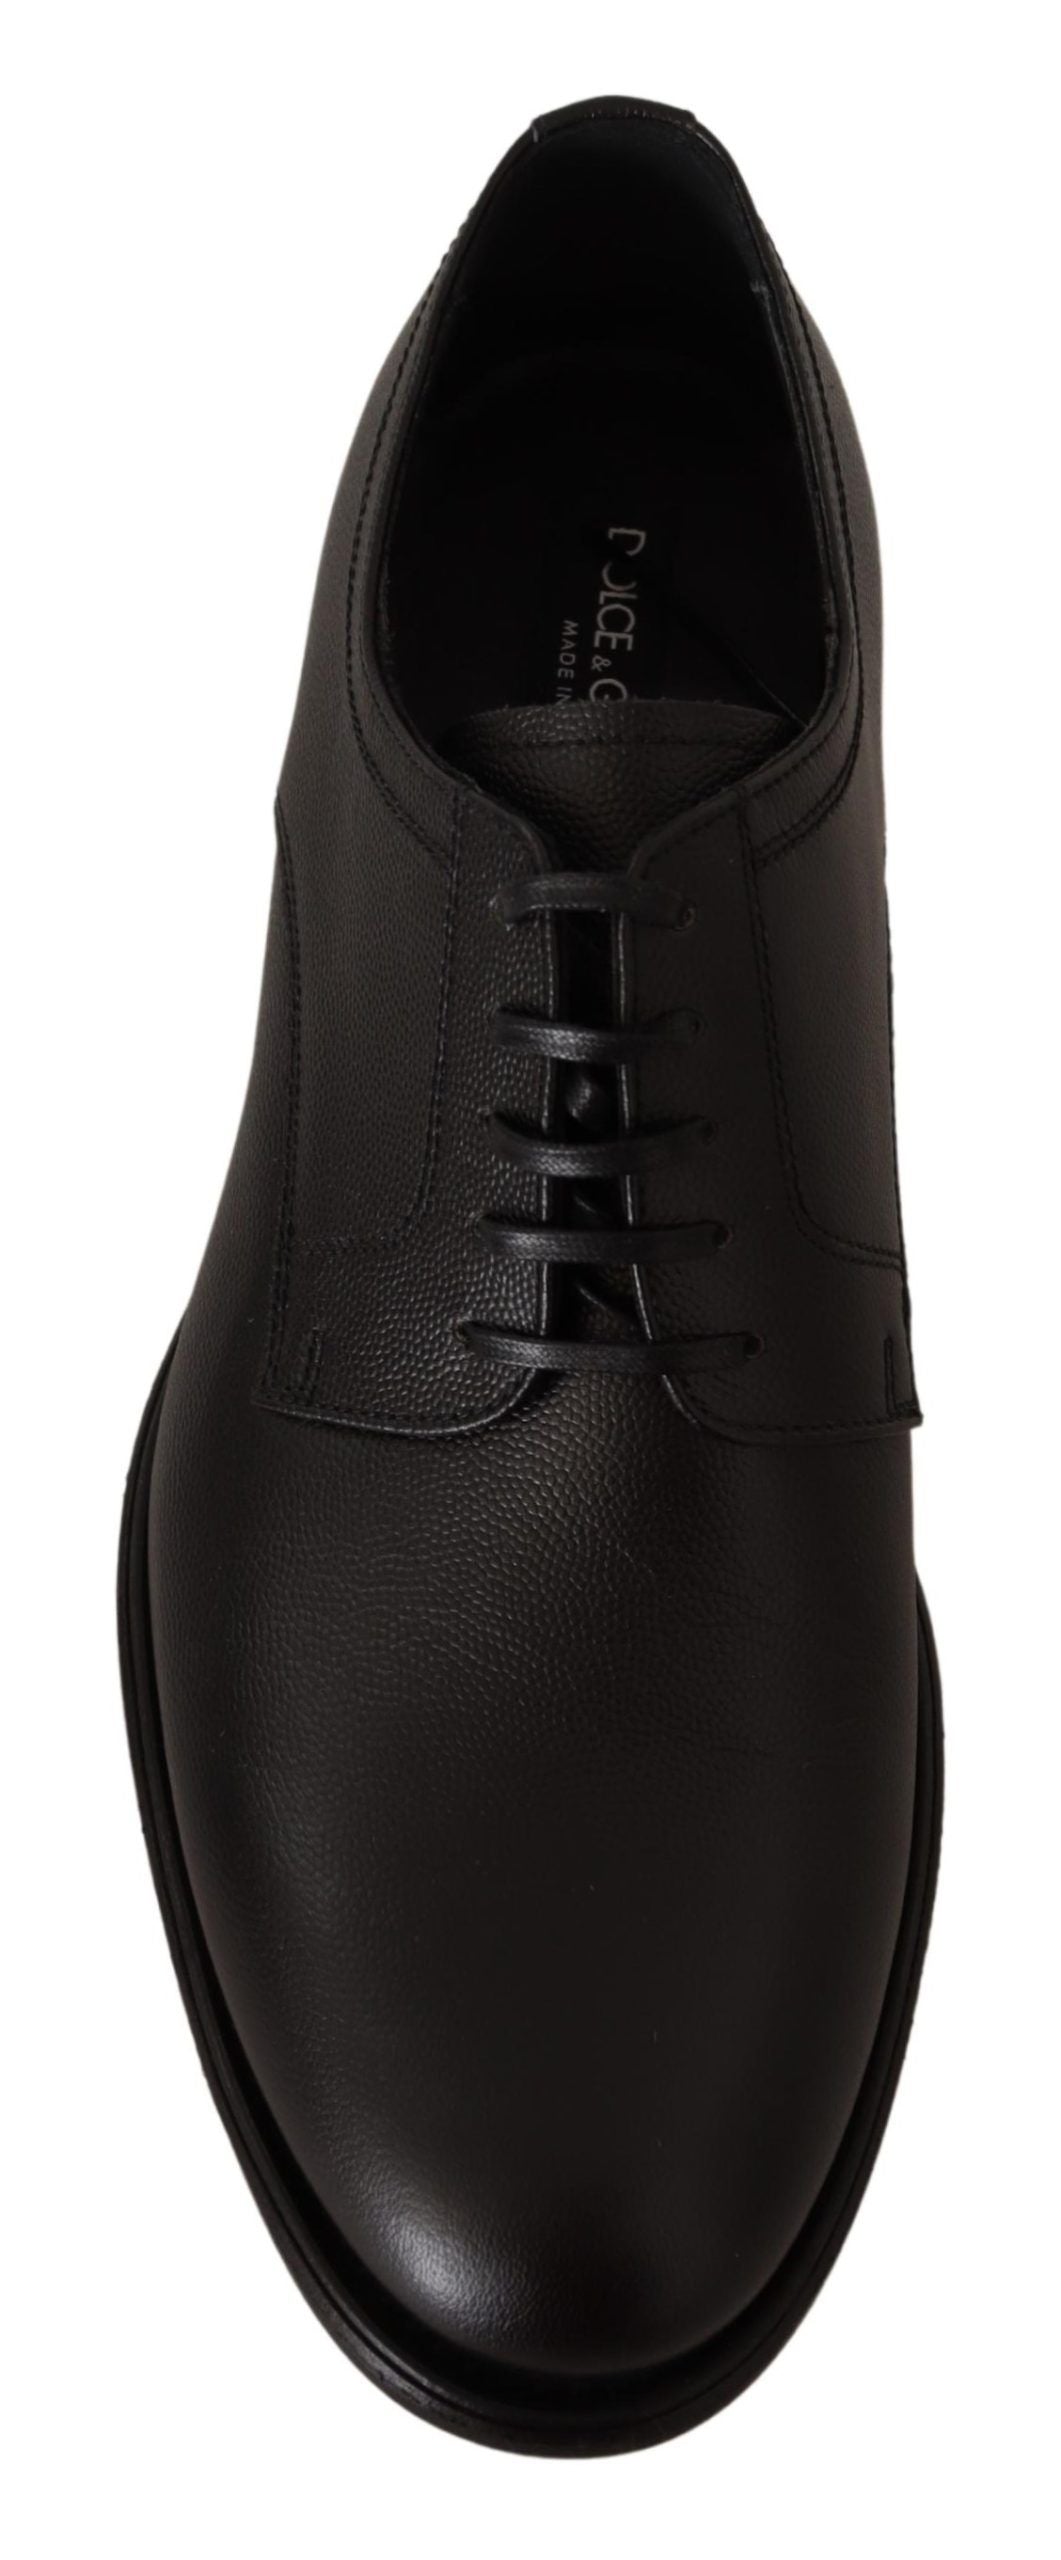 Black Leather Lace Up Mens Formal Derby Shoes